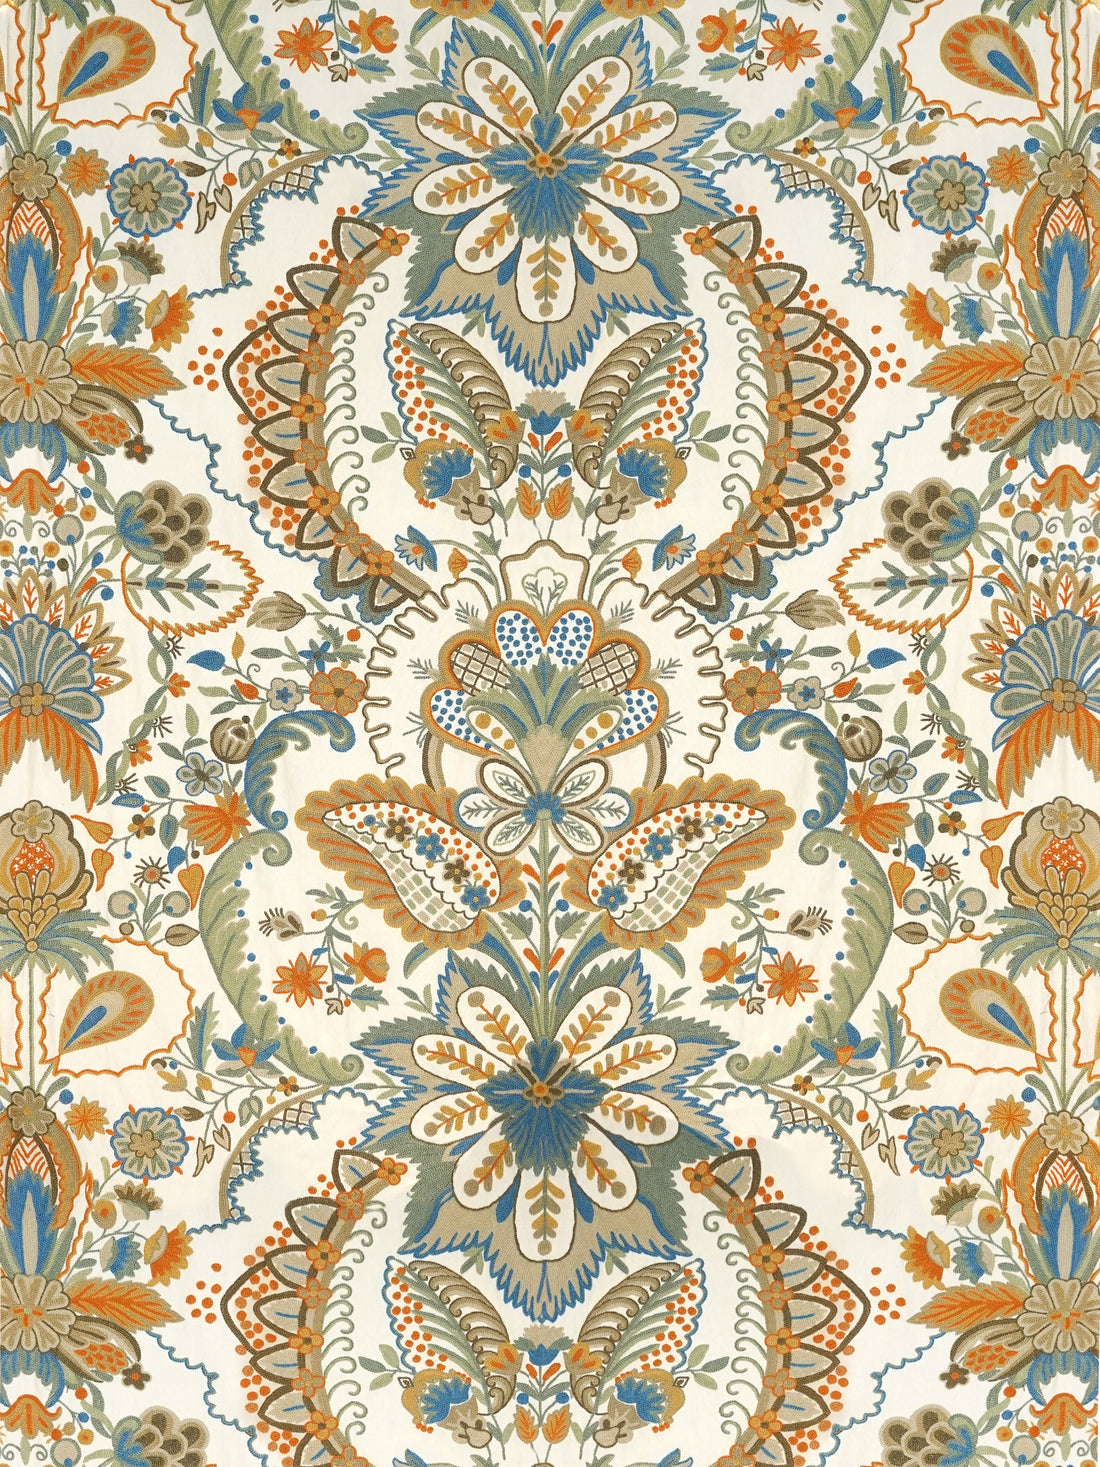 Lalita Crewel fabric in antique color - pattern number EG 00022390 - by Scalamandre in the Old World Weavers collection